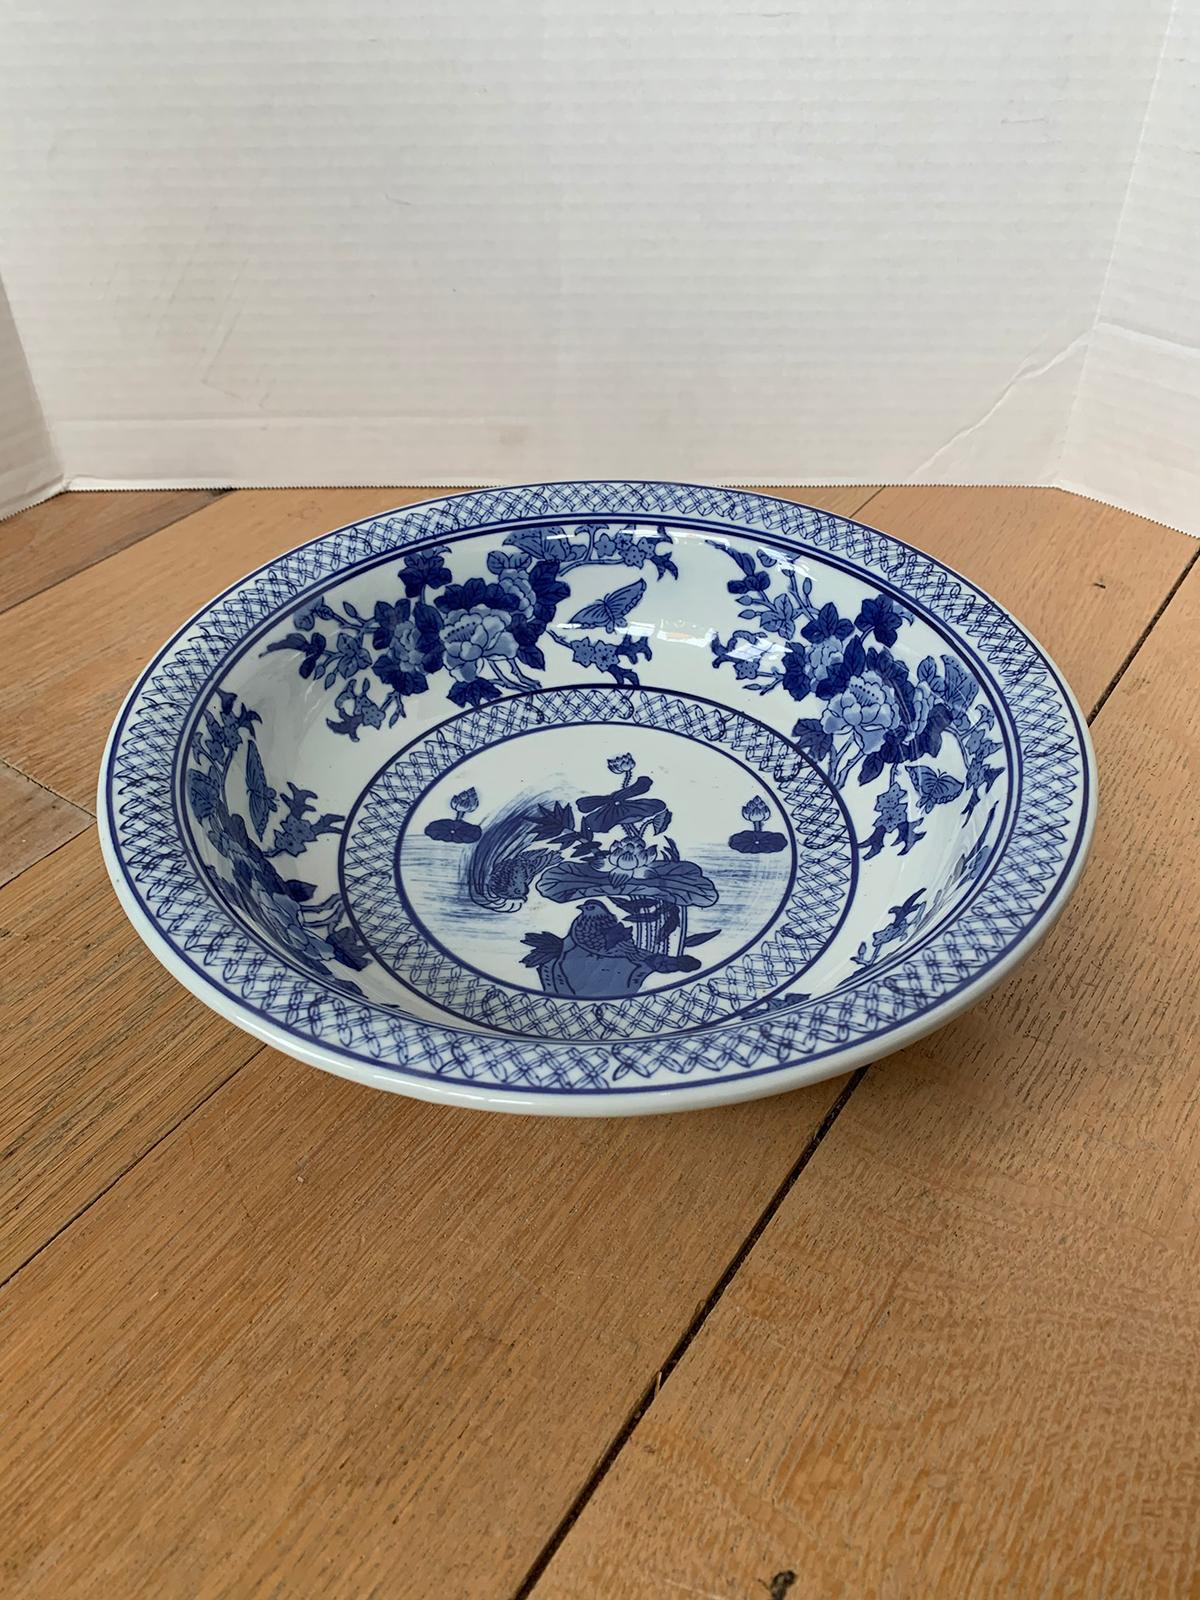 20th Century Chinese Export Blue & White Porcelain Bowl, Marked 